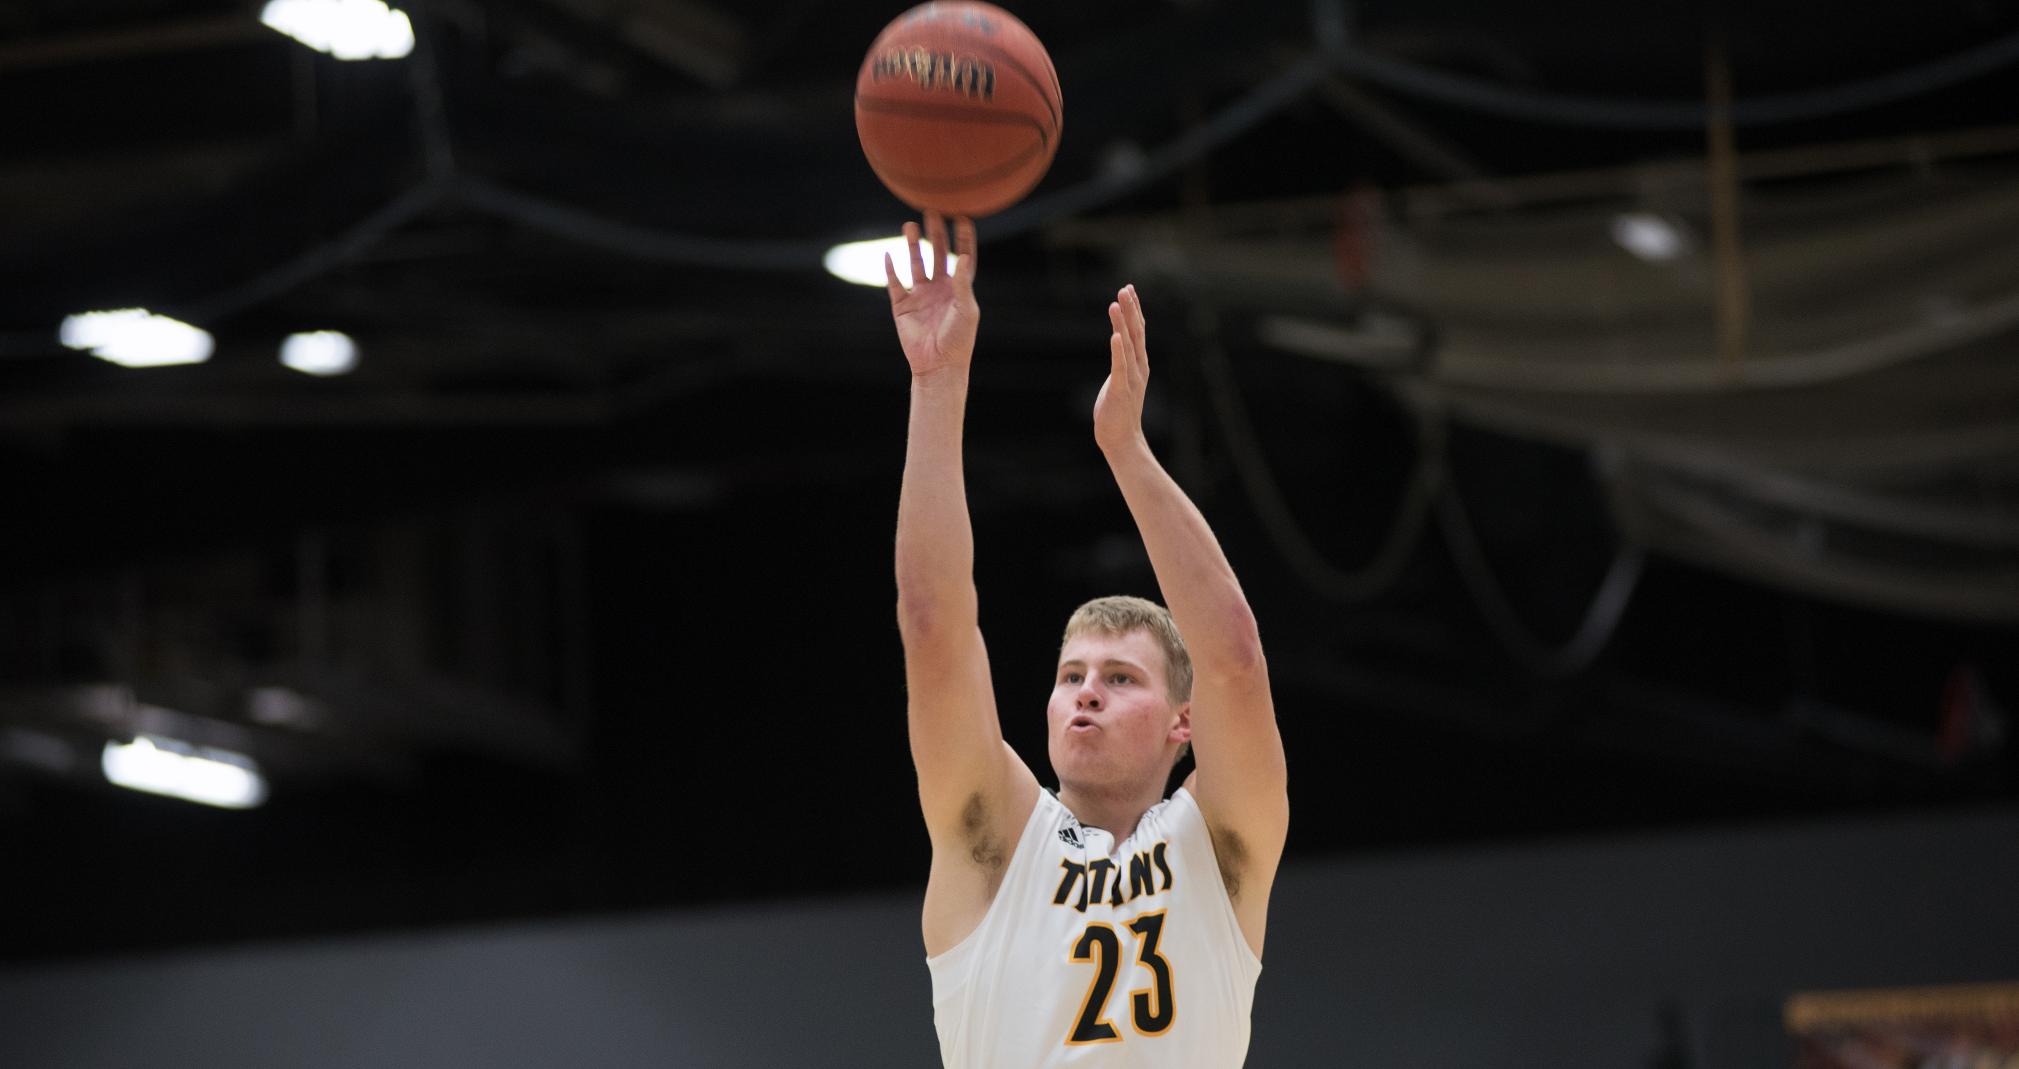 Kyle Bolger shared the UW-Oshkosh lead in both points (10) and rebounds (5) against the Pioneers.